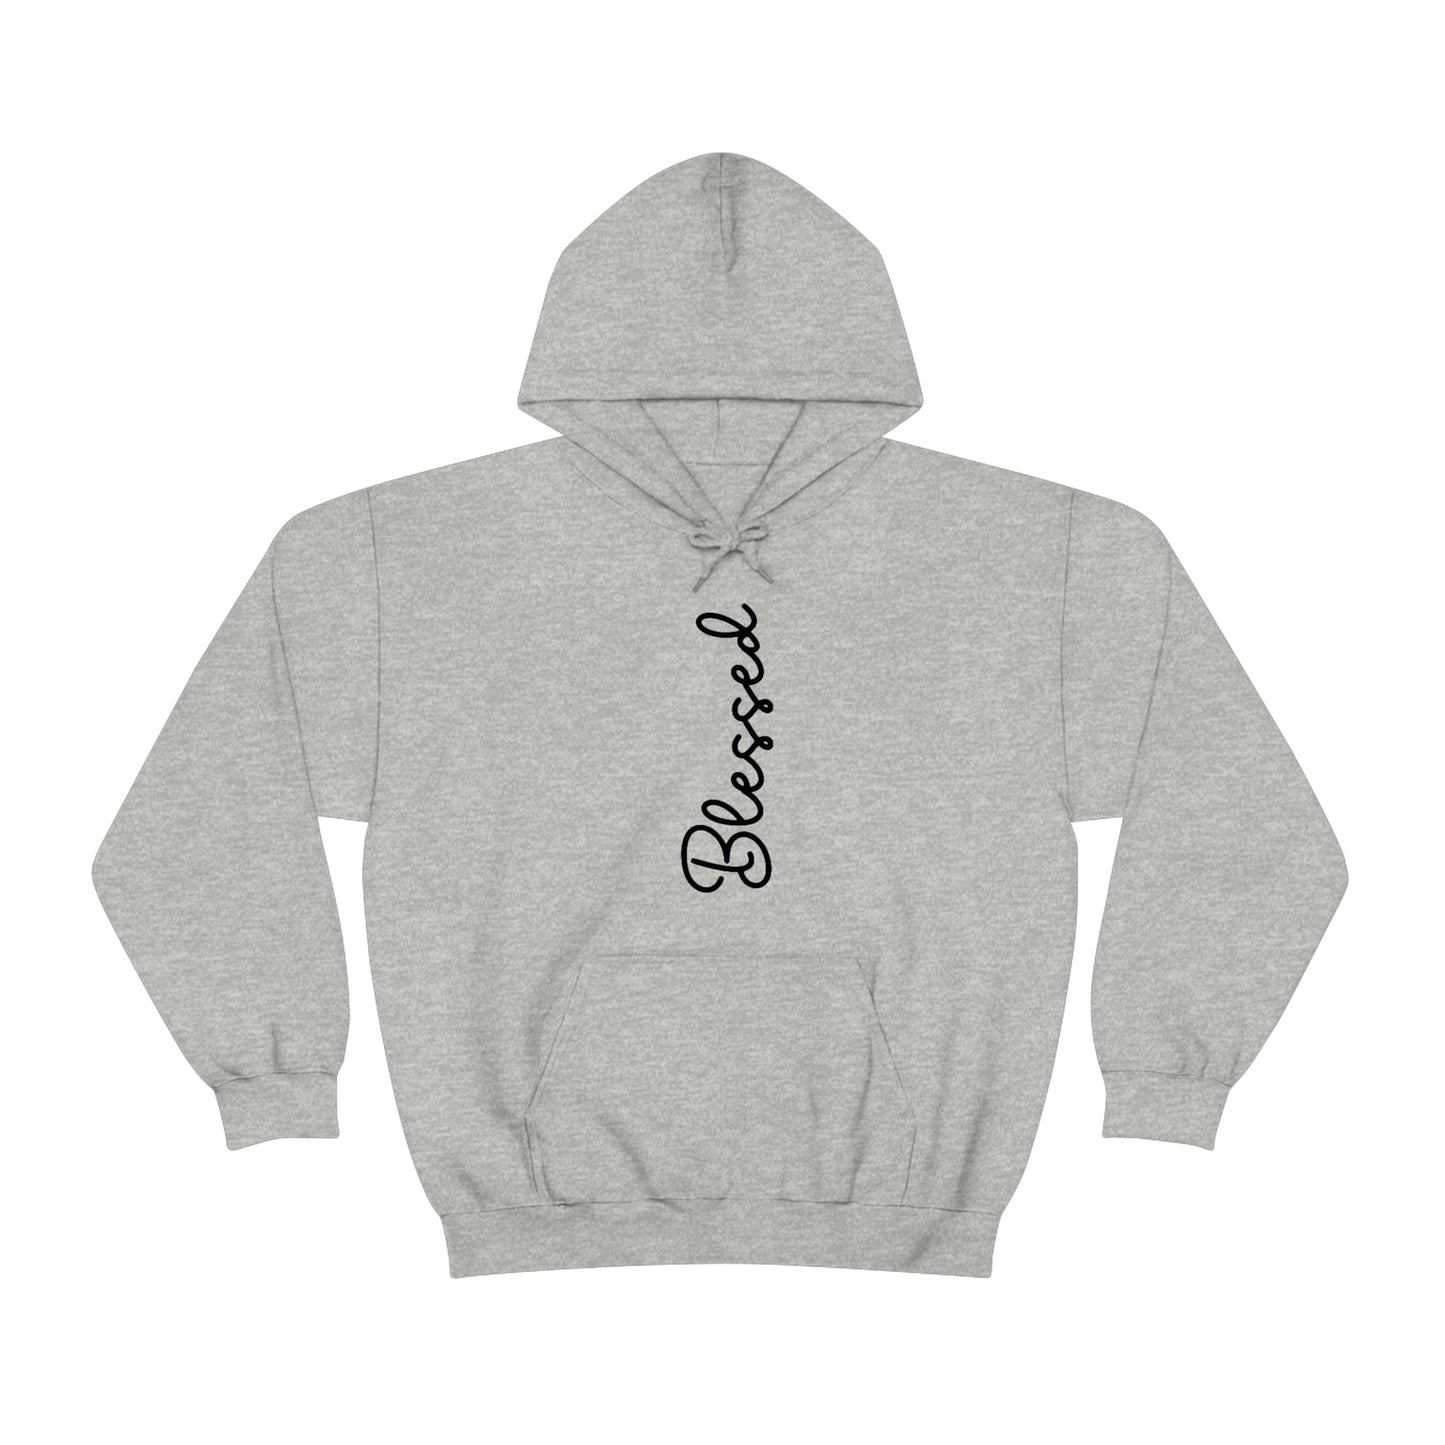 blessed hoodie, faith-based clothing, Christian apparel, inspirational clothing.